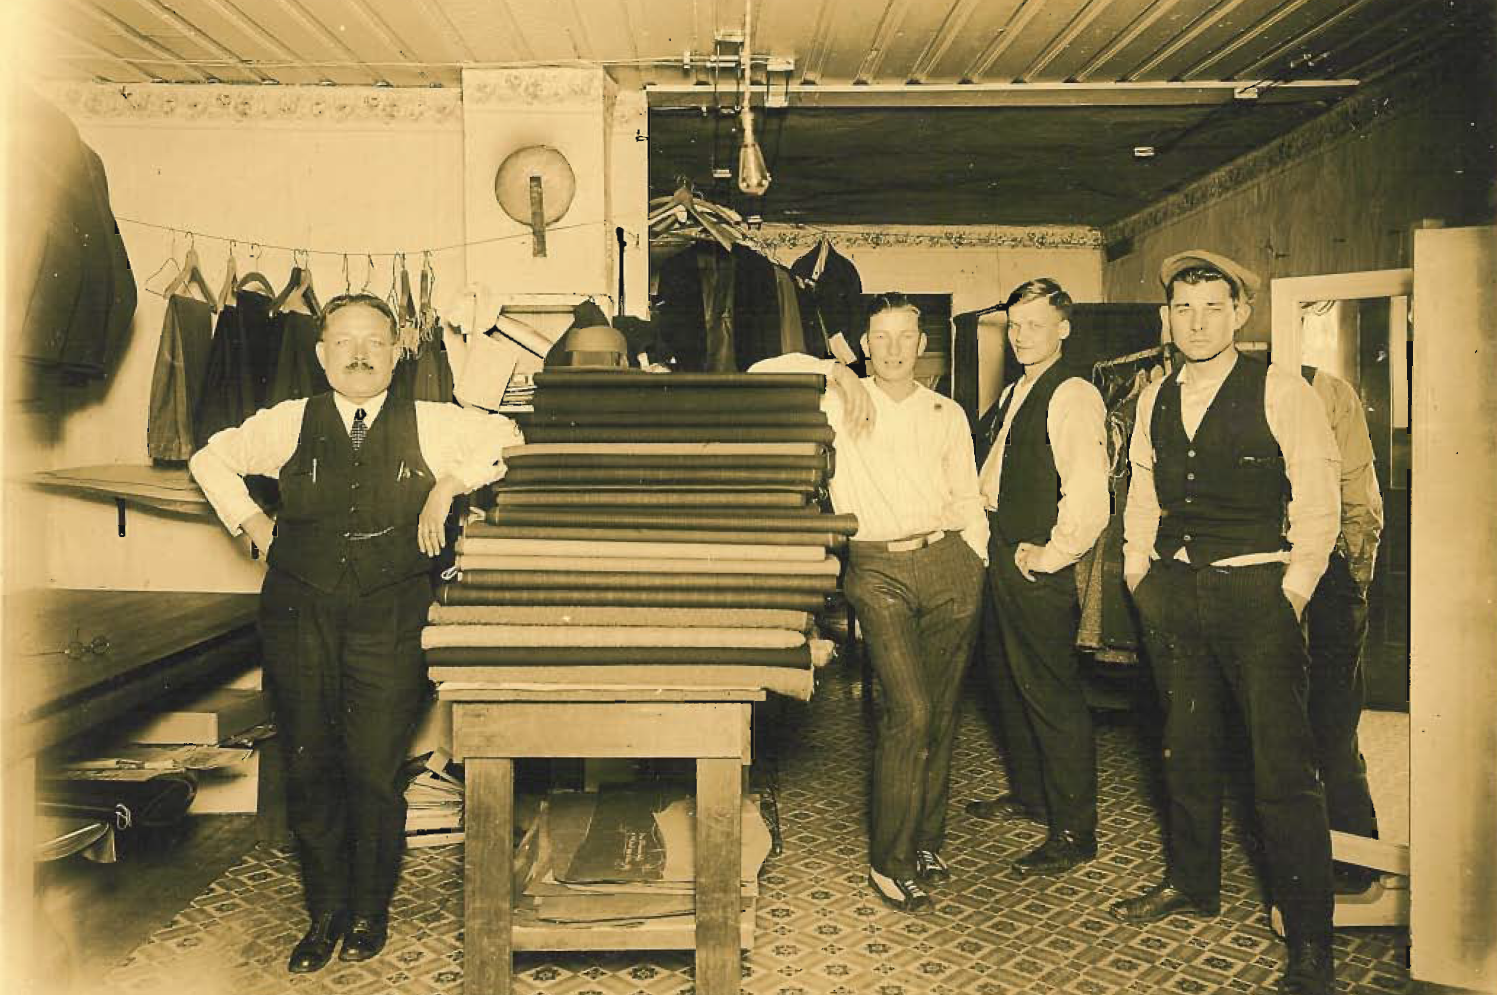 Archival photo of men posing with fabrics in a taliors shop.